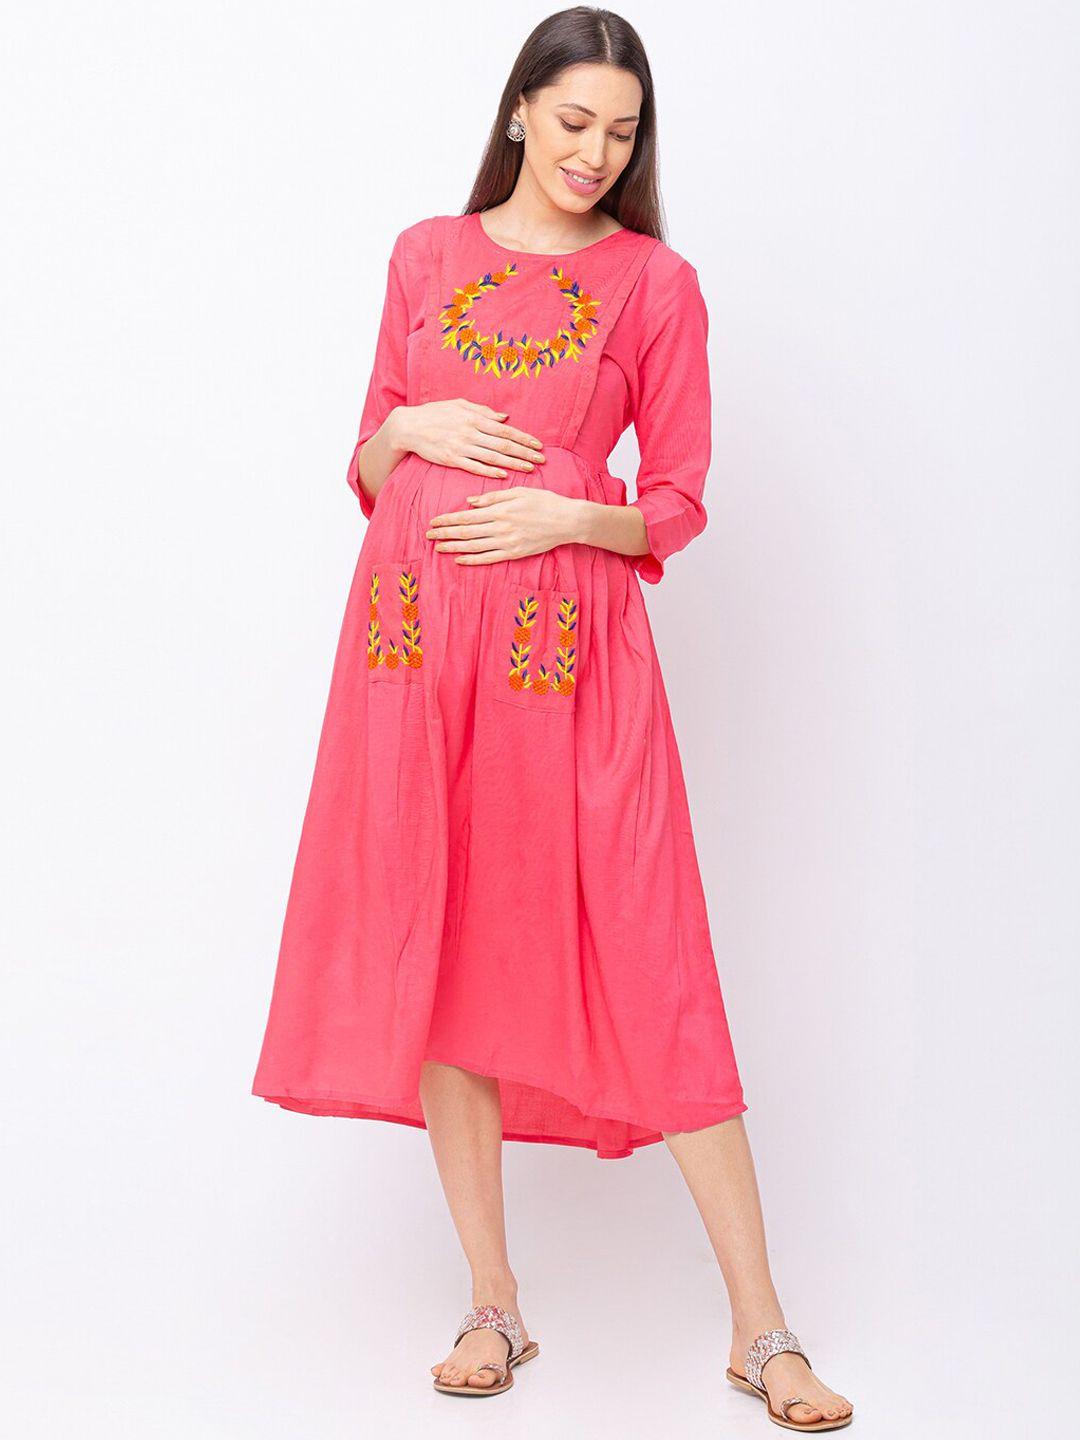 momtobe women pink embroidered maternity nursing fit and flare dress